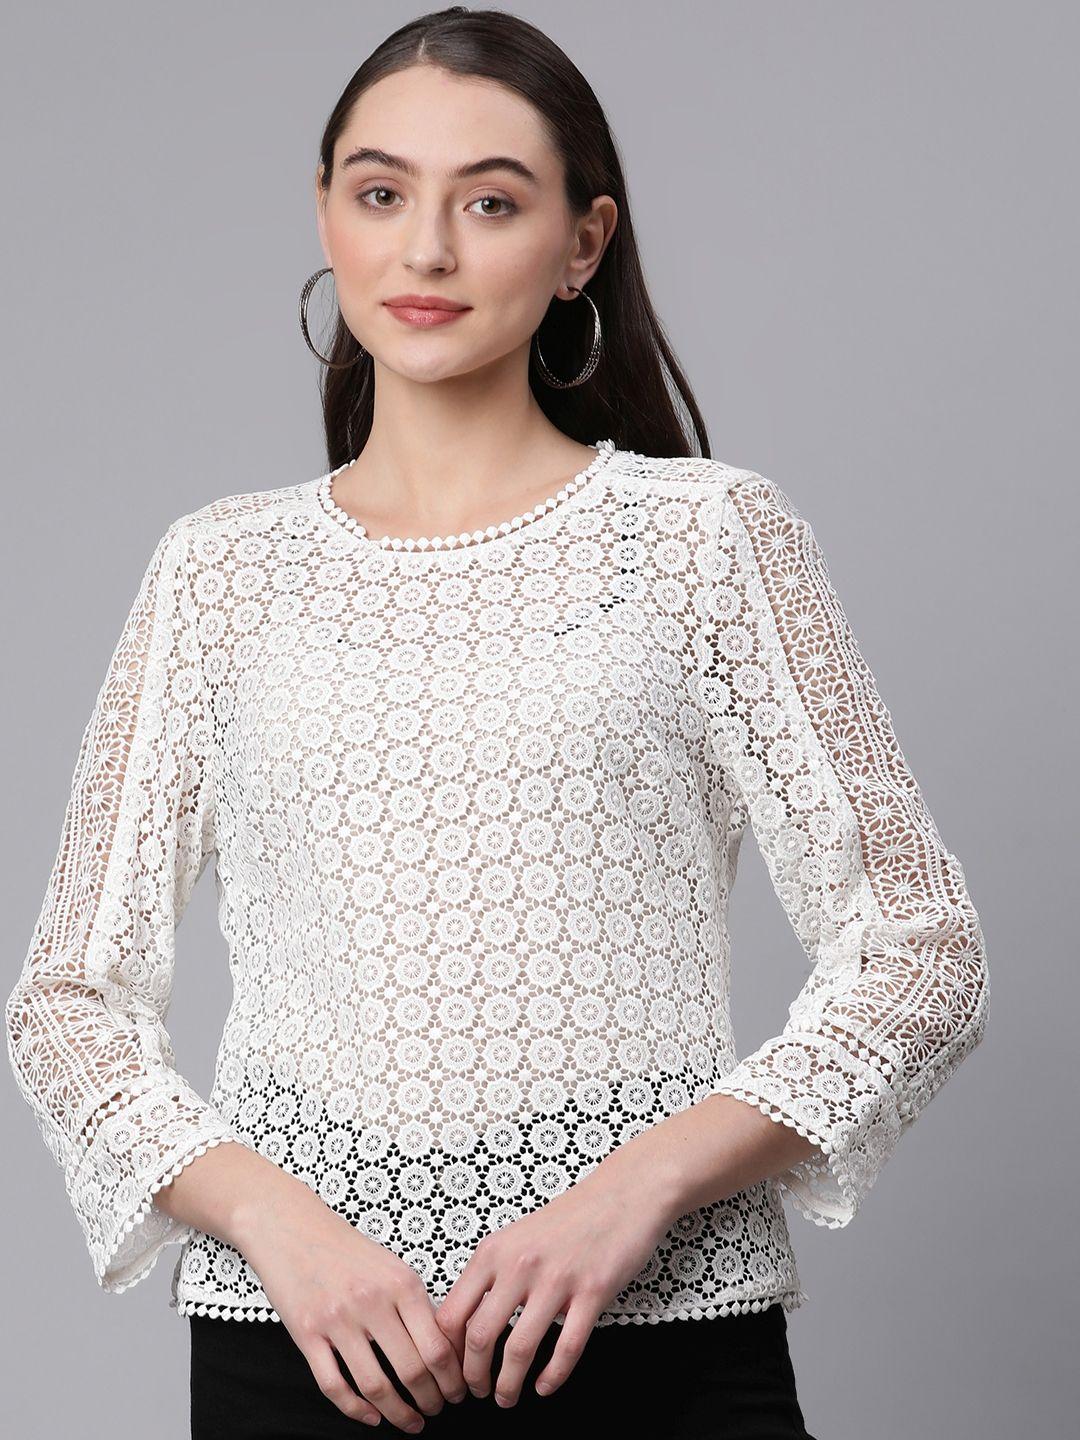 marks-&-spencer-women-white-floral-lace-top